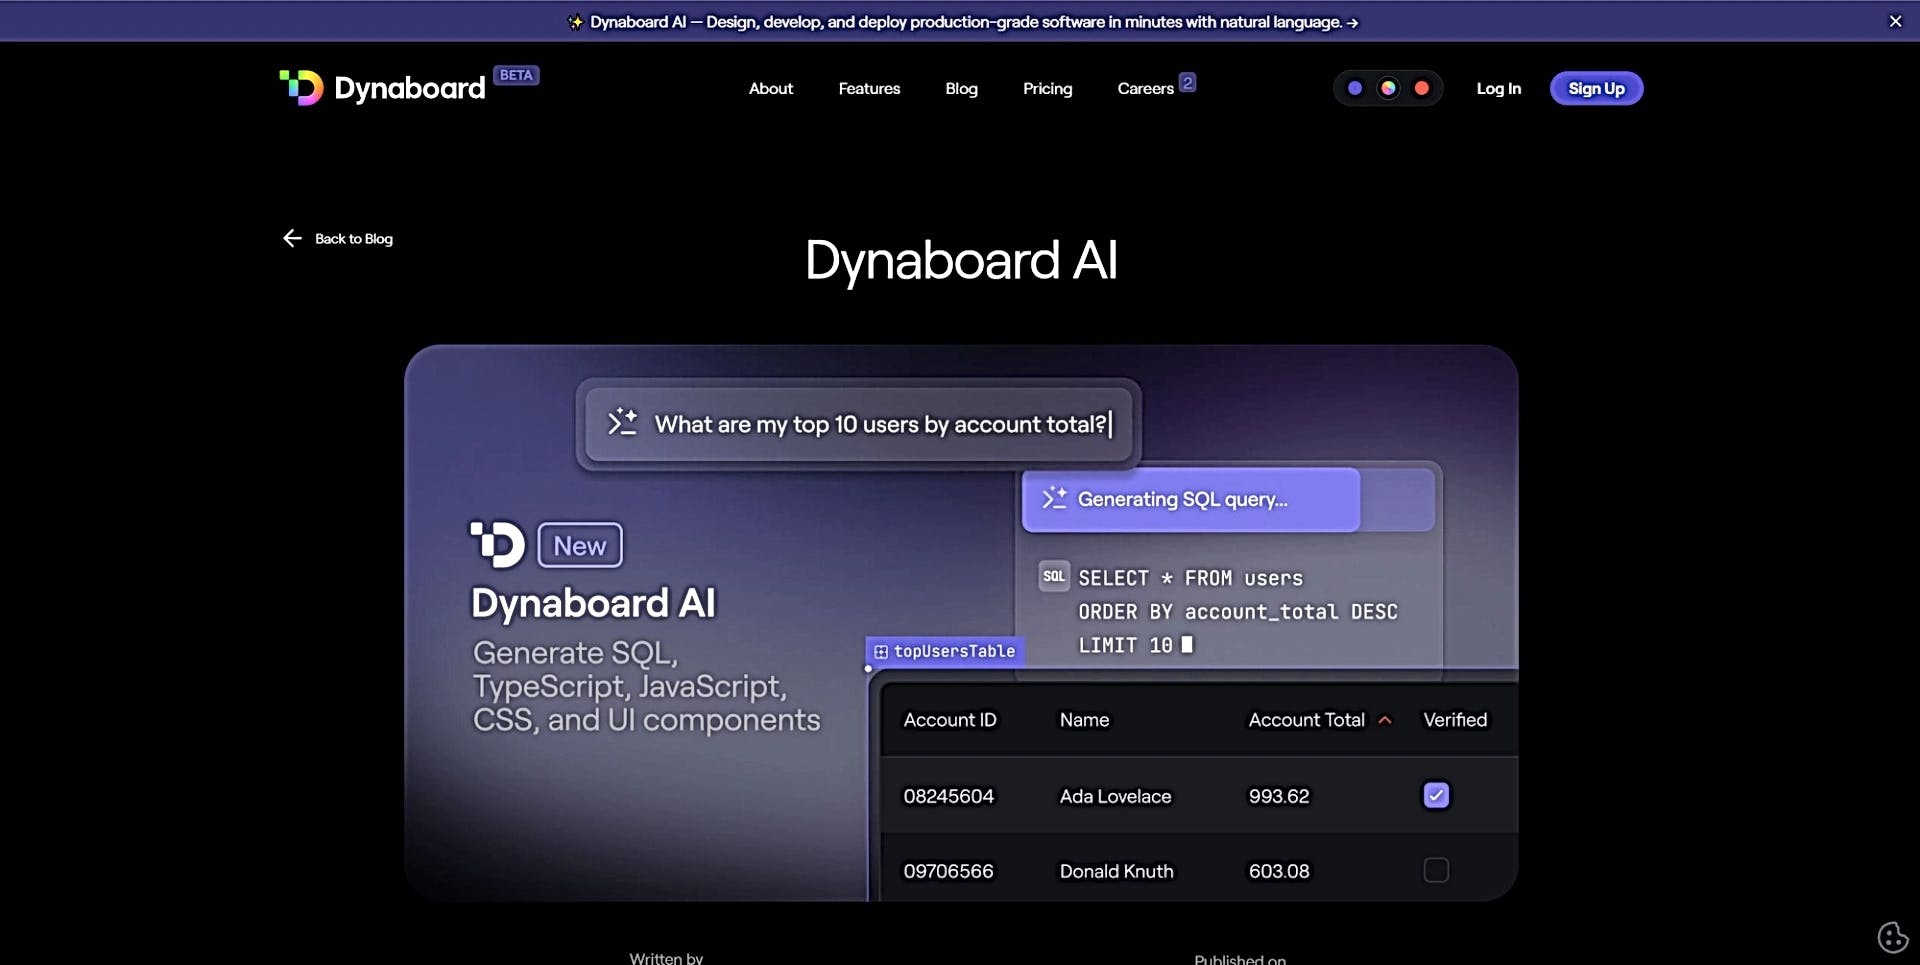 Dynaboard AI featured